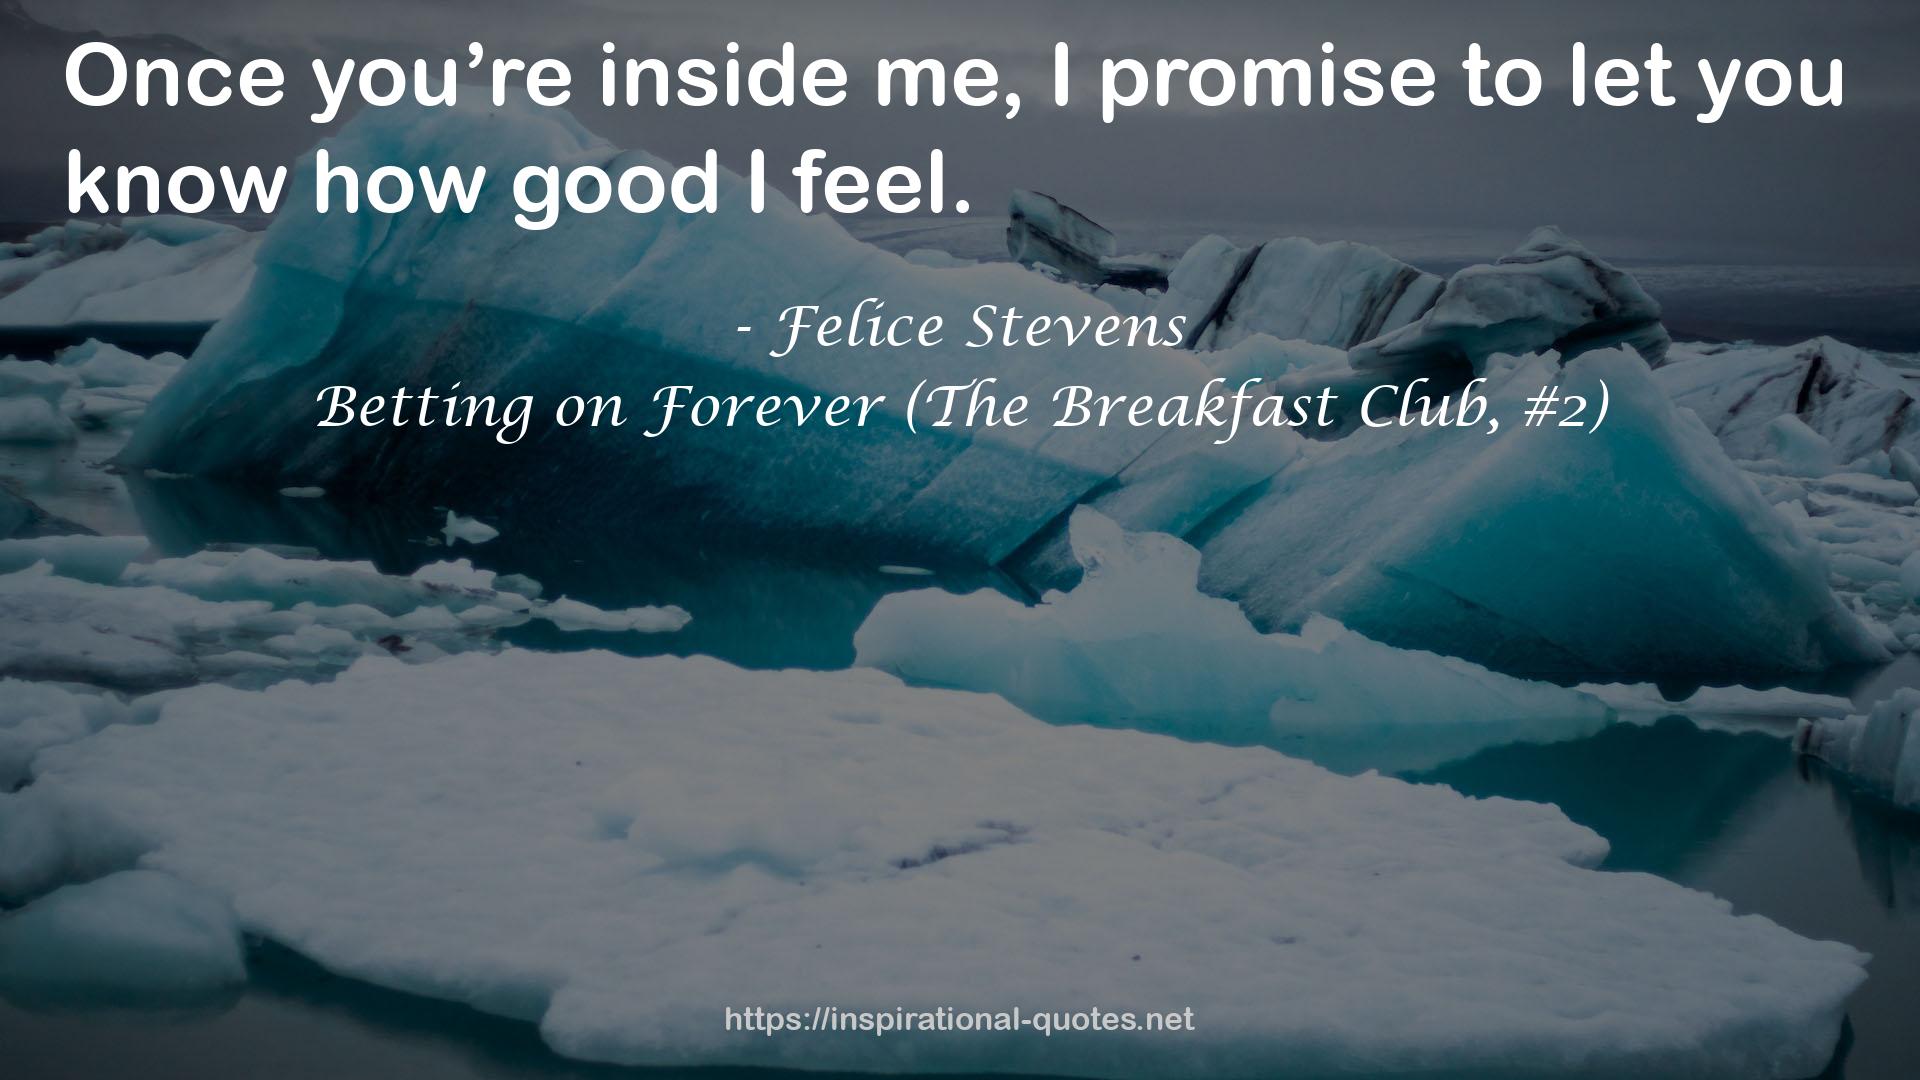 Betting on Forever (The Breakfast Club, #2) QUOTES